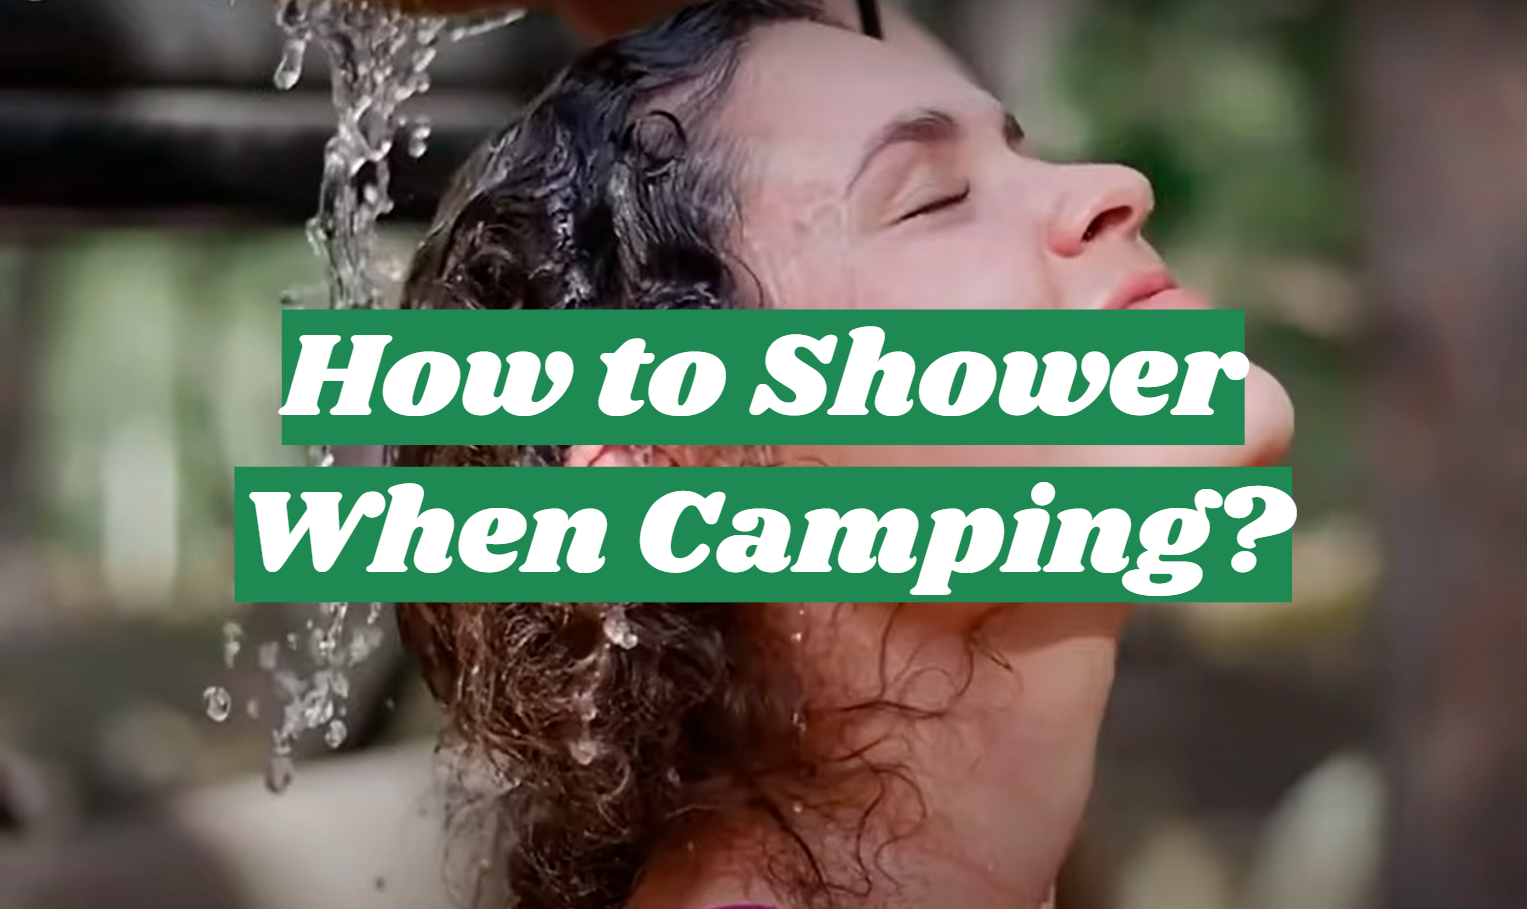 How to Shower When Camping?